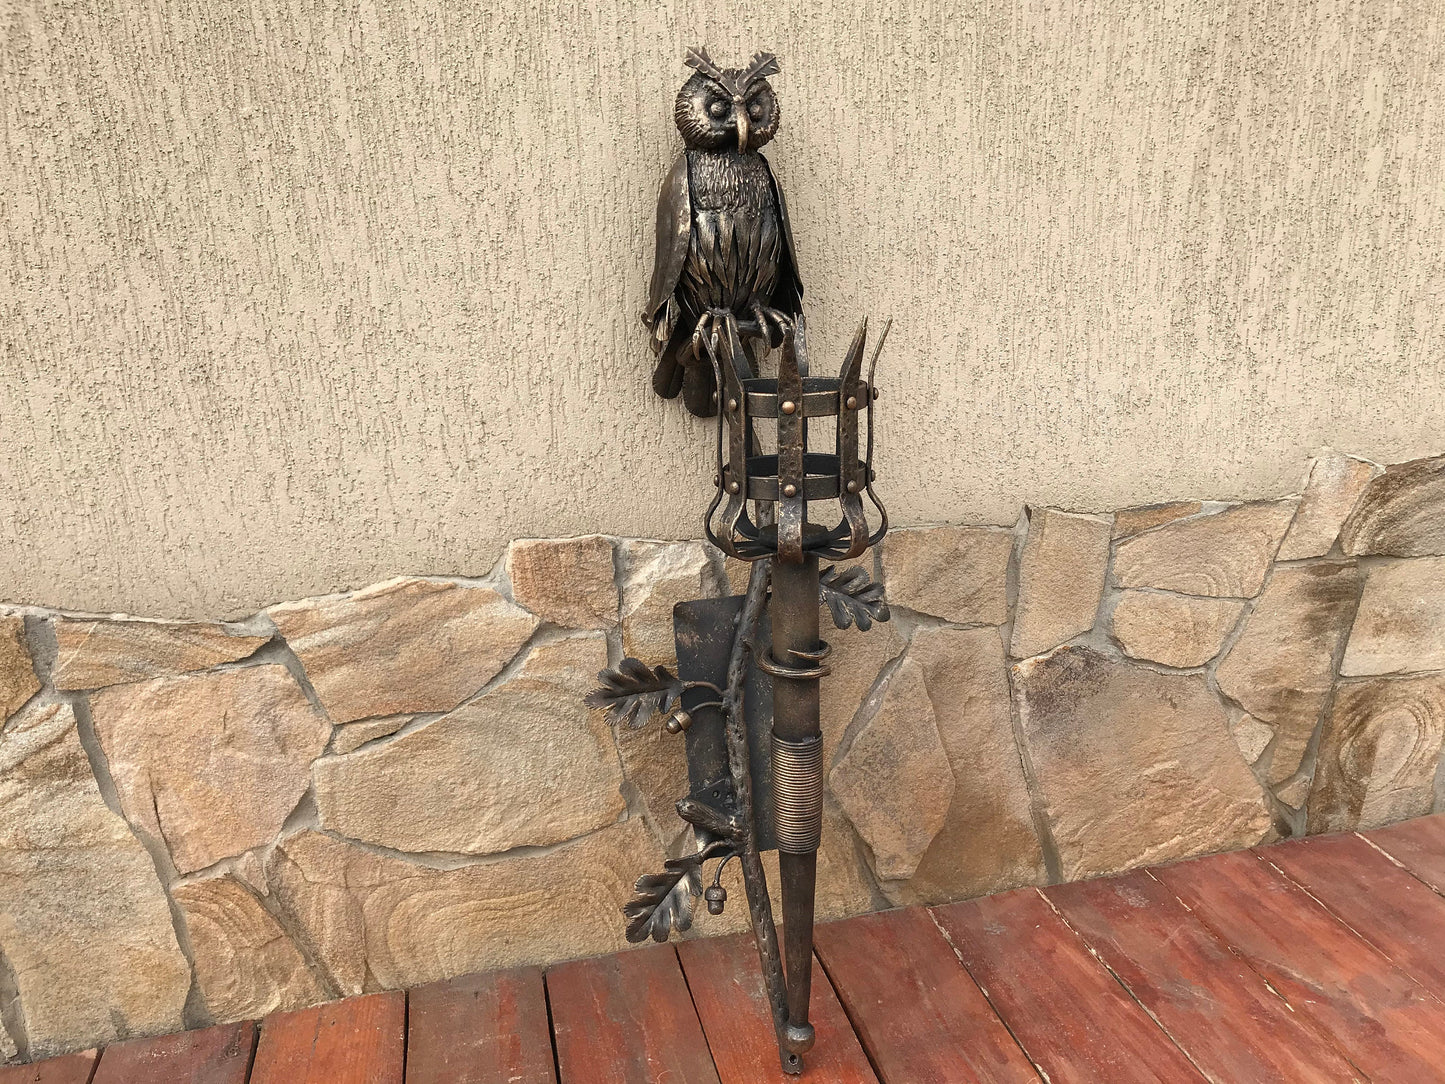 Medieval sconce, castle decor, iron anniversary, wall sconce,viking sconce,Christmas gift,castle gift,medieval gift,owl decor,medieval torch